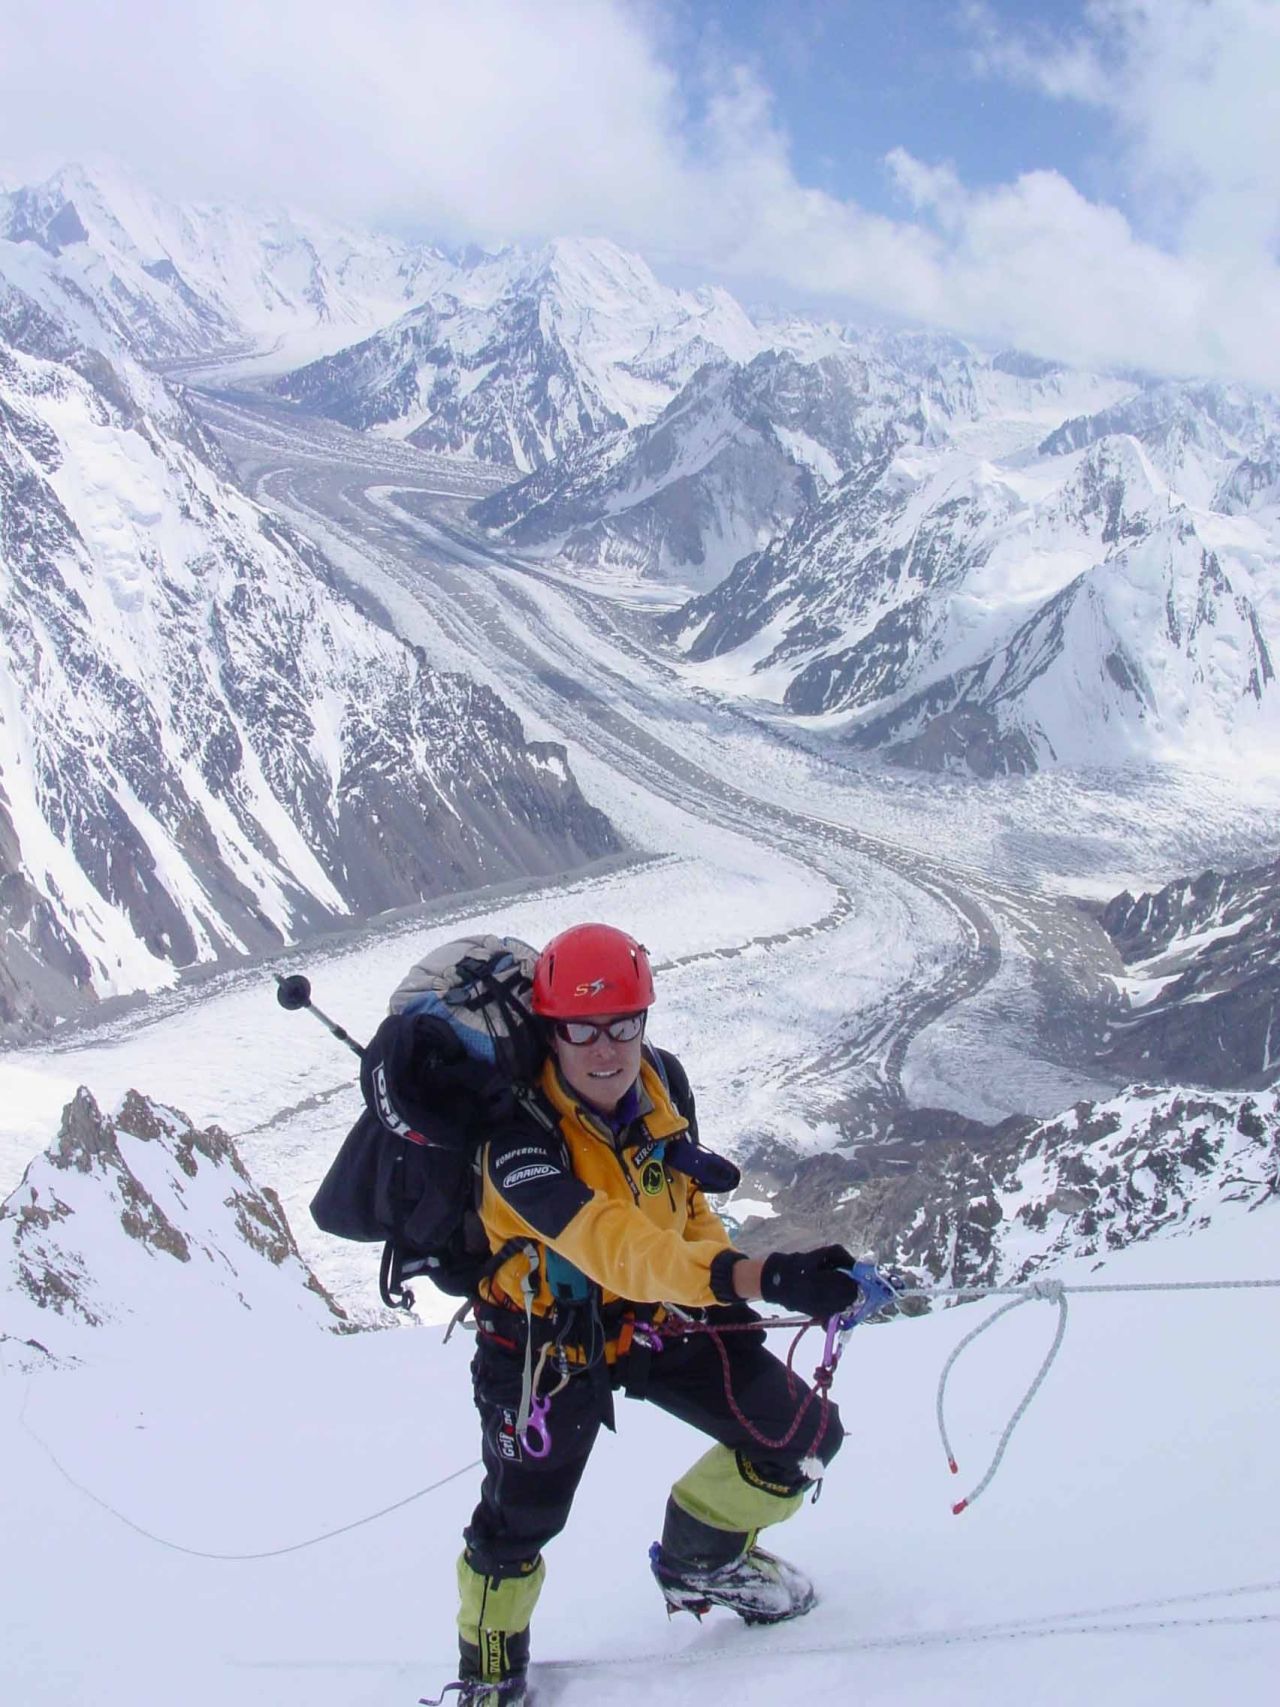 As a child, Pasaban enjoyed trekking with her parents in the Basque Country. At the age of 14, she joined a mountaineering club and took up climbing, initially in the Pyrenees and the Alps, before progressing to the Himalayas. <br /><br />Here, Pasaban is pictured in the midst of climbing K2, the world's second highest mountain at 8,611m, on the border of Pakistan and China, in 2004.